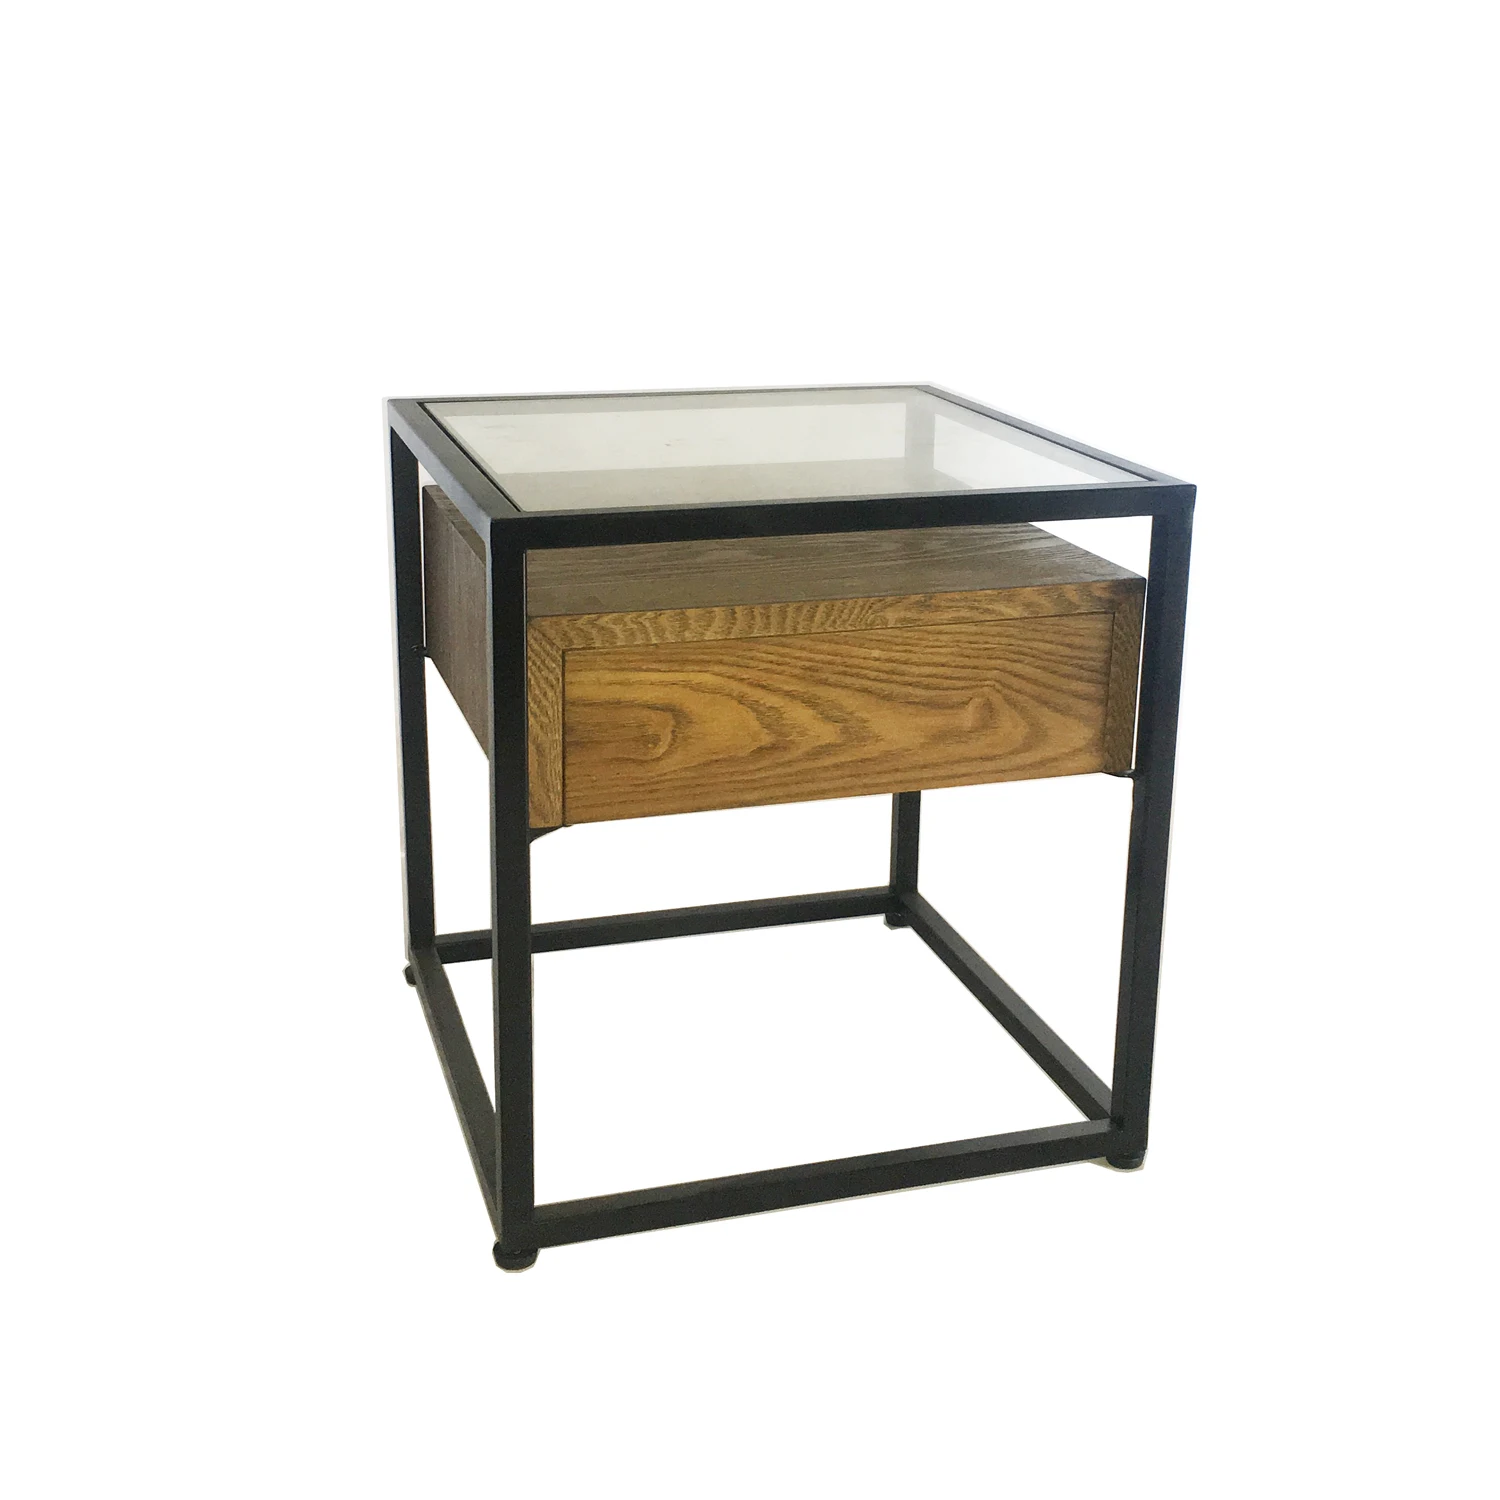 OEM Cocktail Wooden Coffee Table glass coffee tables for Living Room